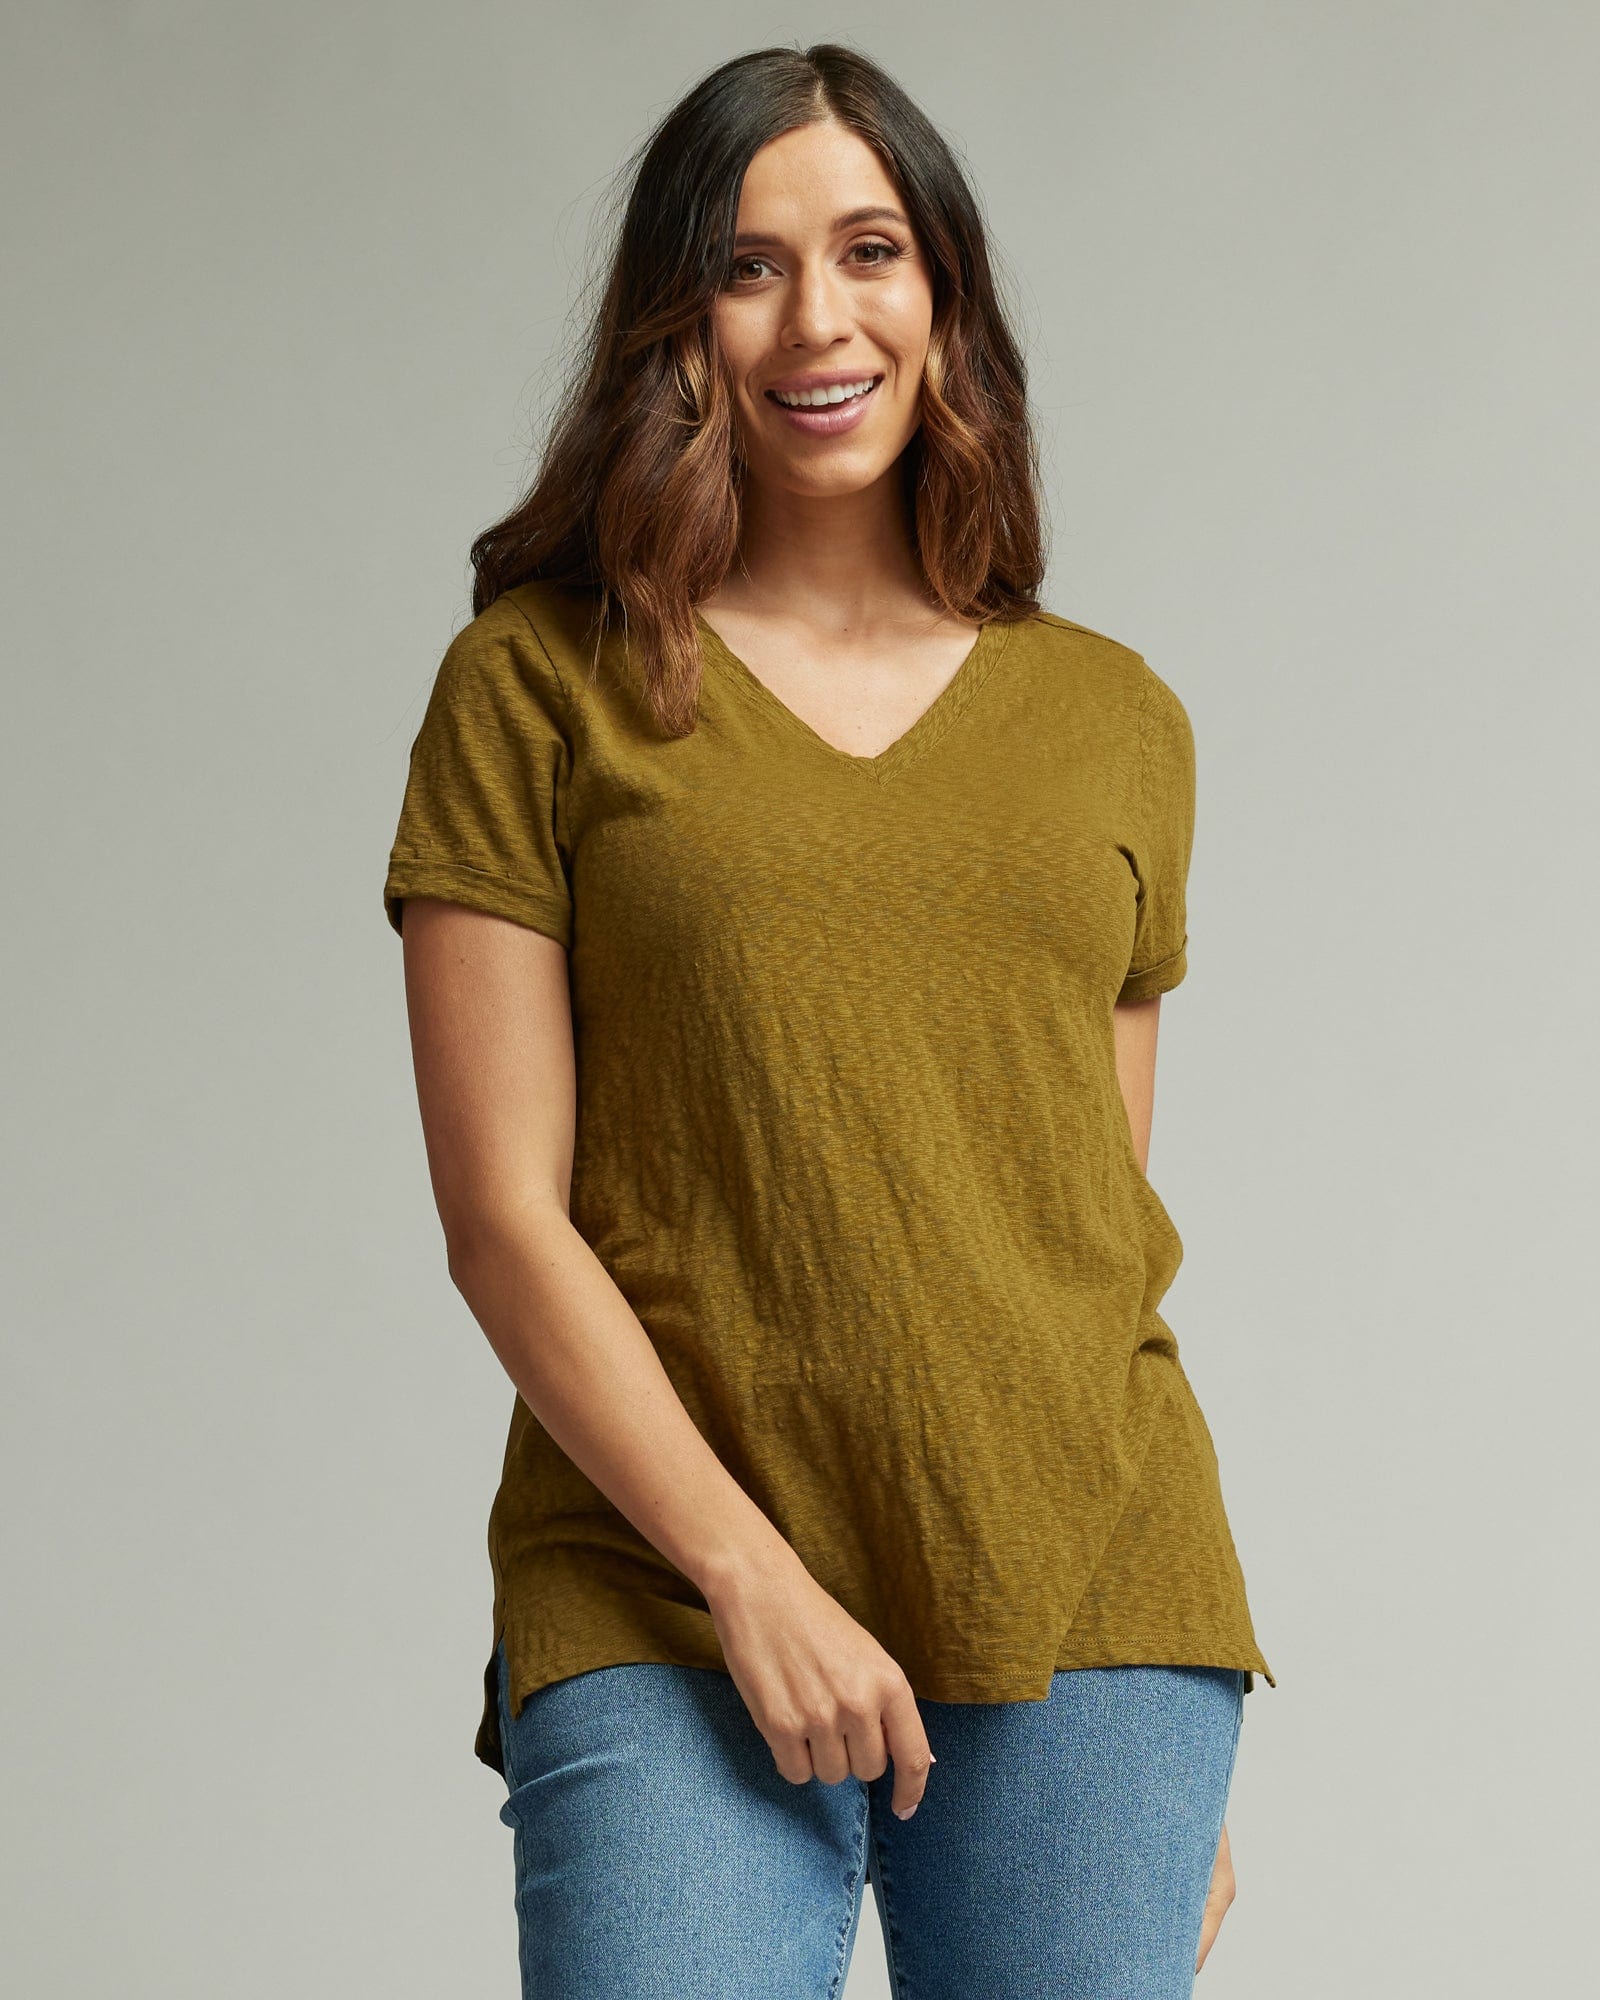 Woman in a short sleeve, v-neck, green blouse